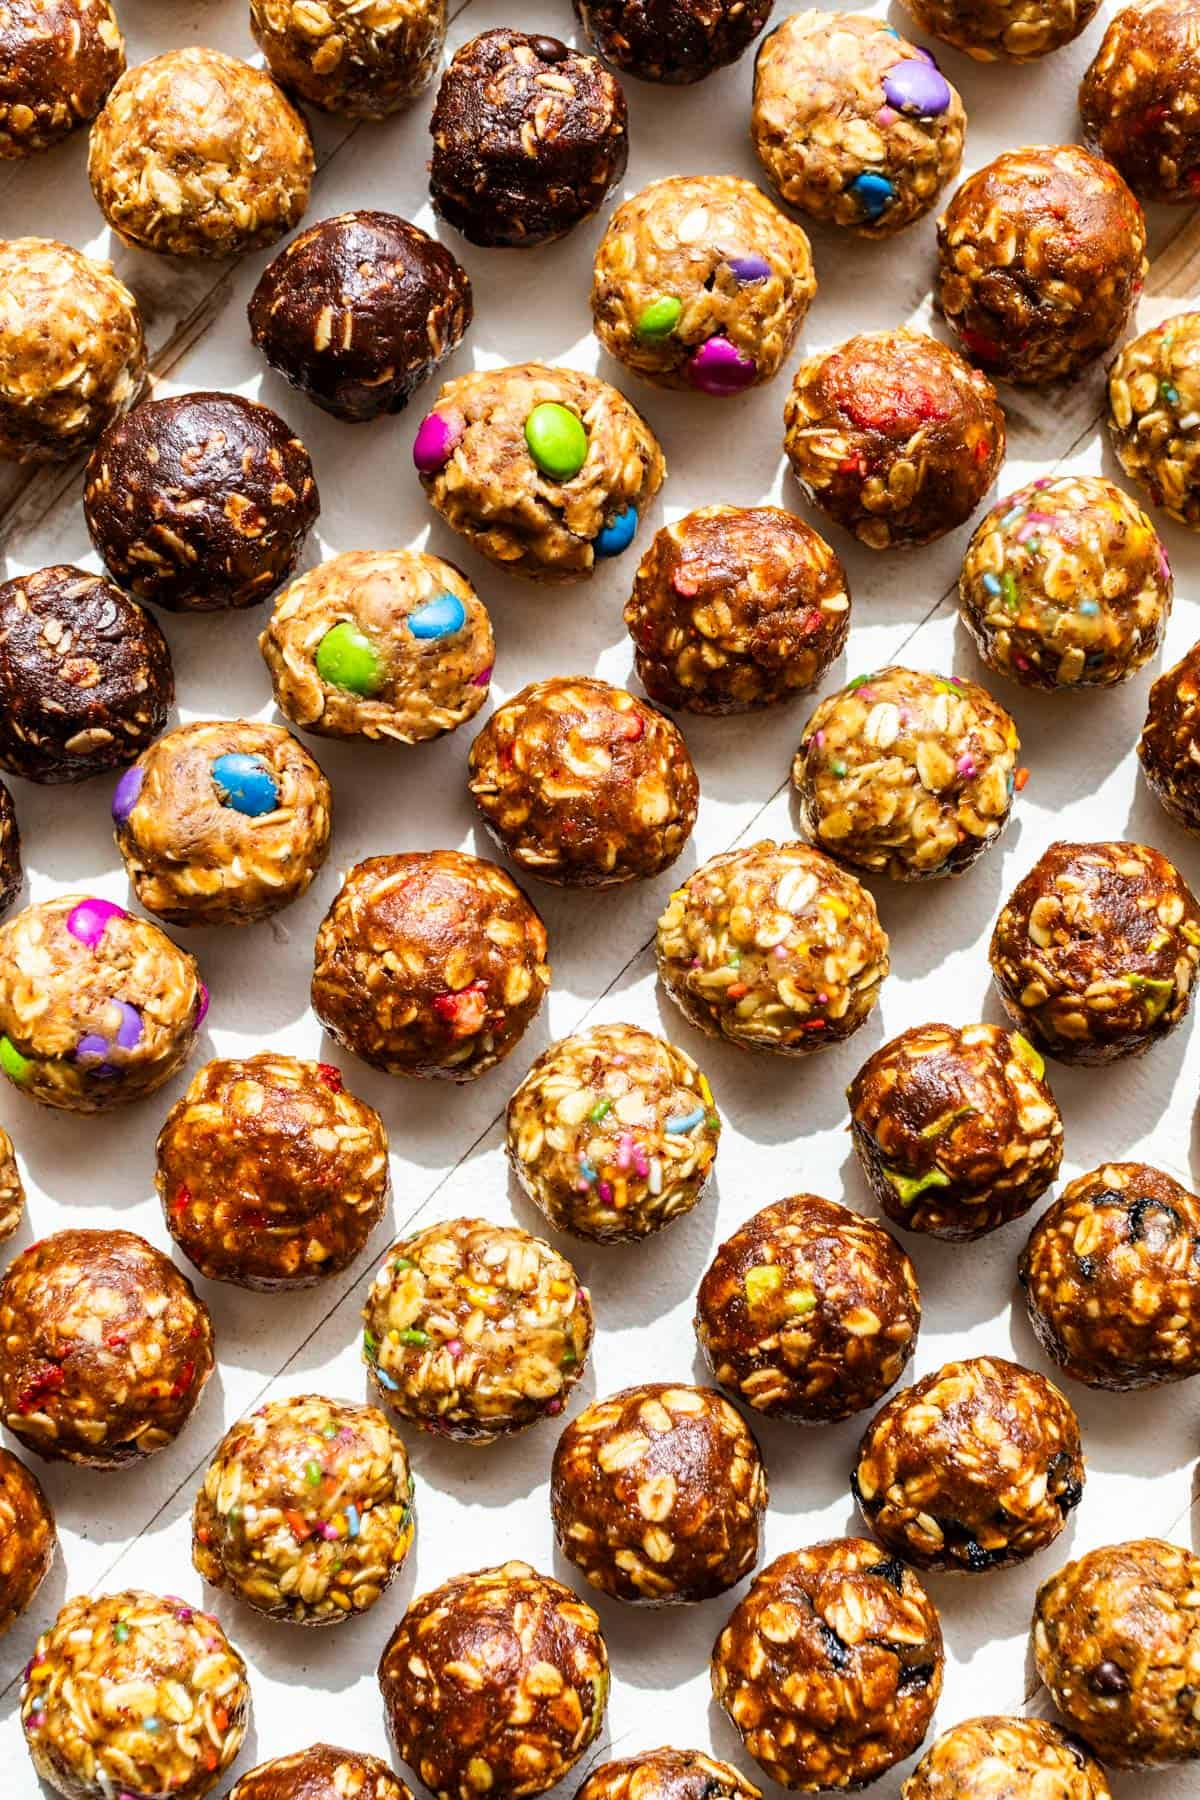 8 of the 10 Flavors of No Bake Energy Bites on a white background laid out in diagonal rows.